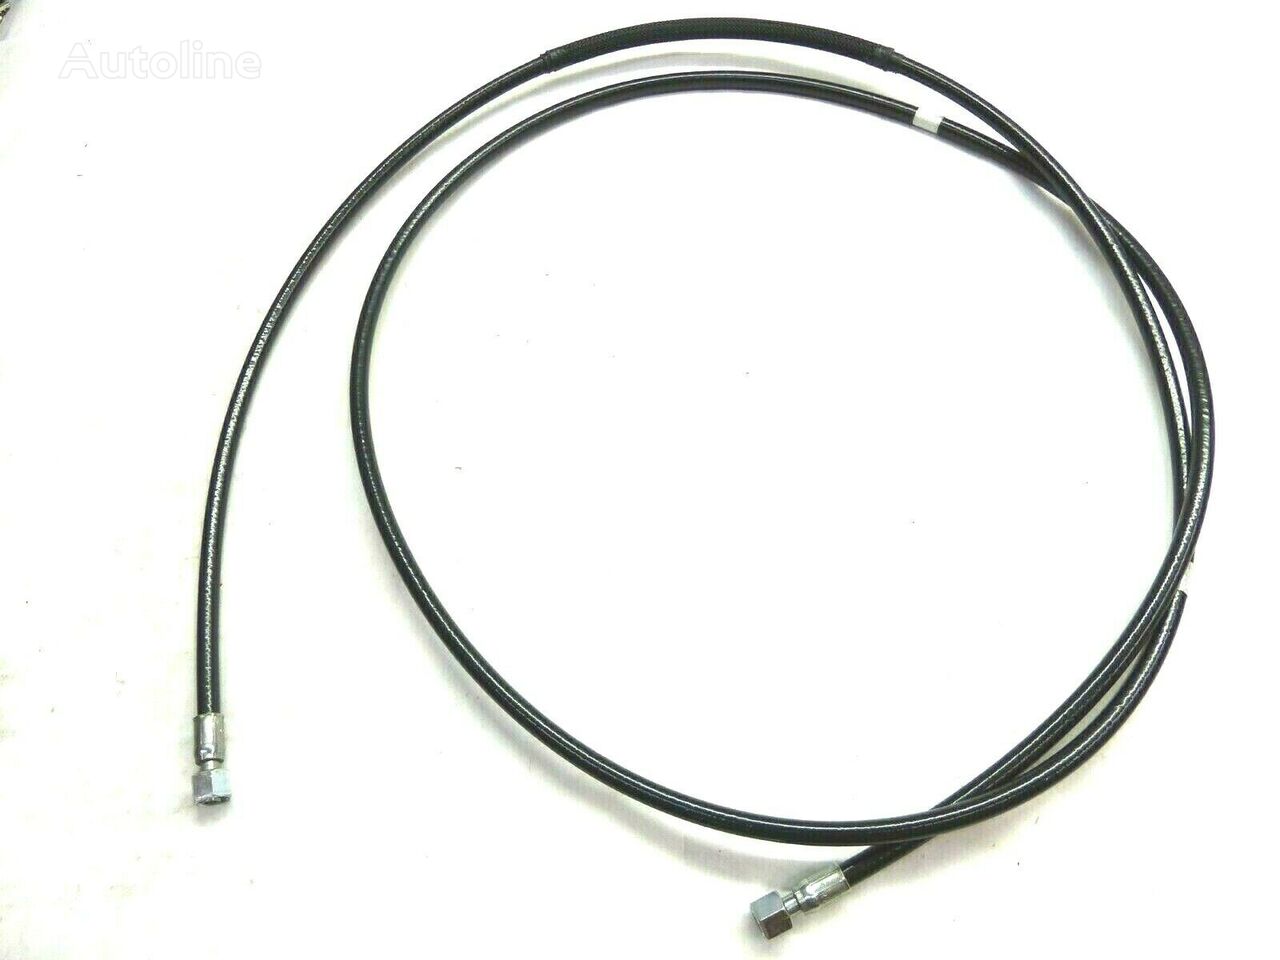 IVECO Original 41236888 hydraulic hose for IVECO truck tractor